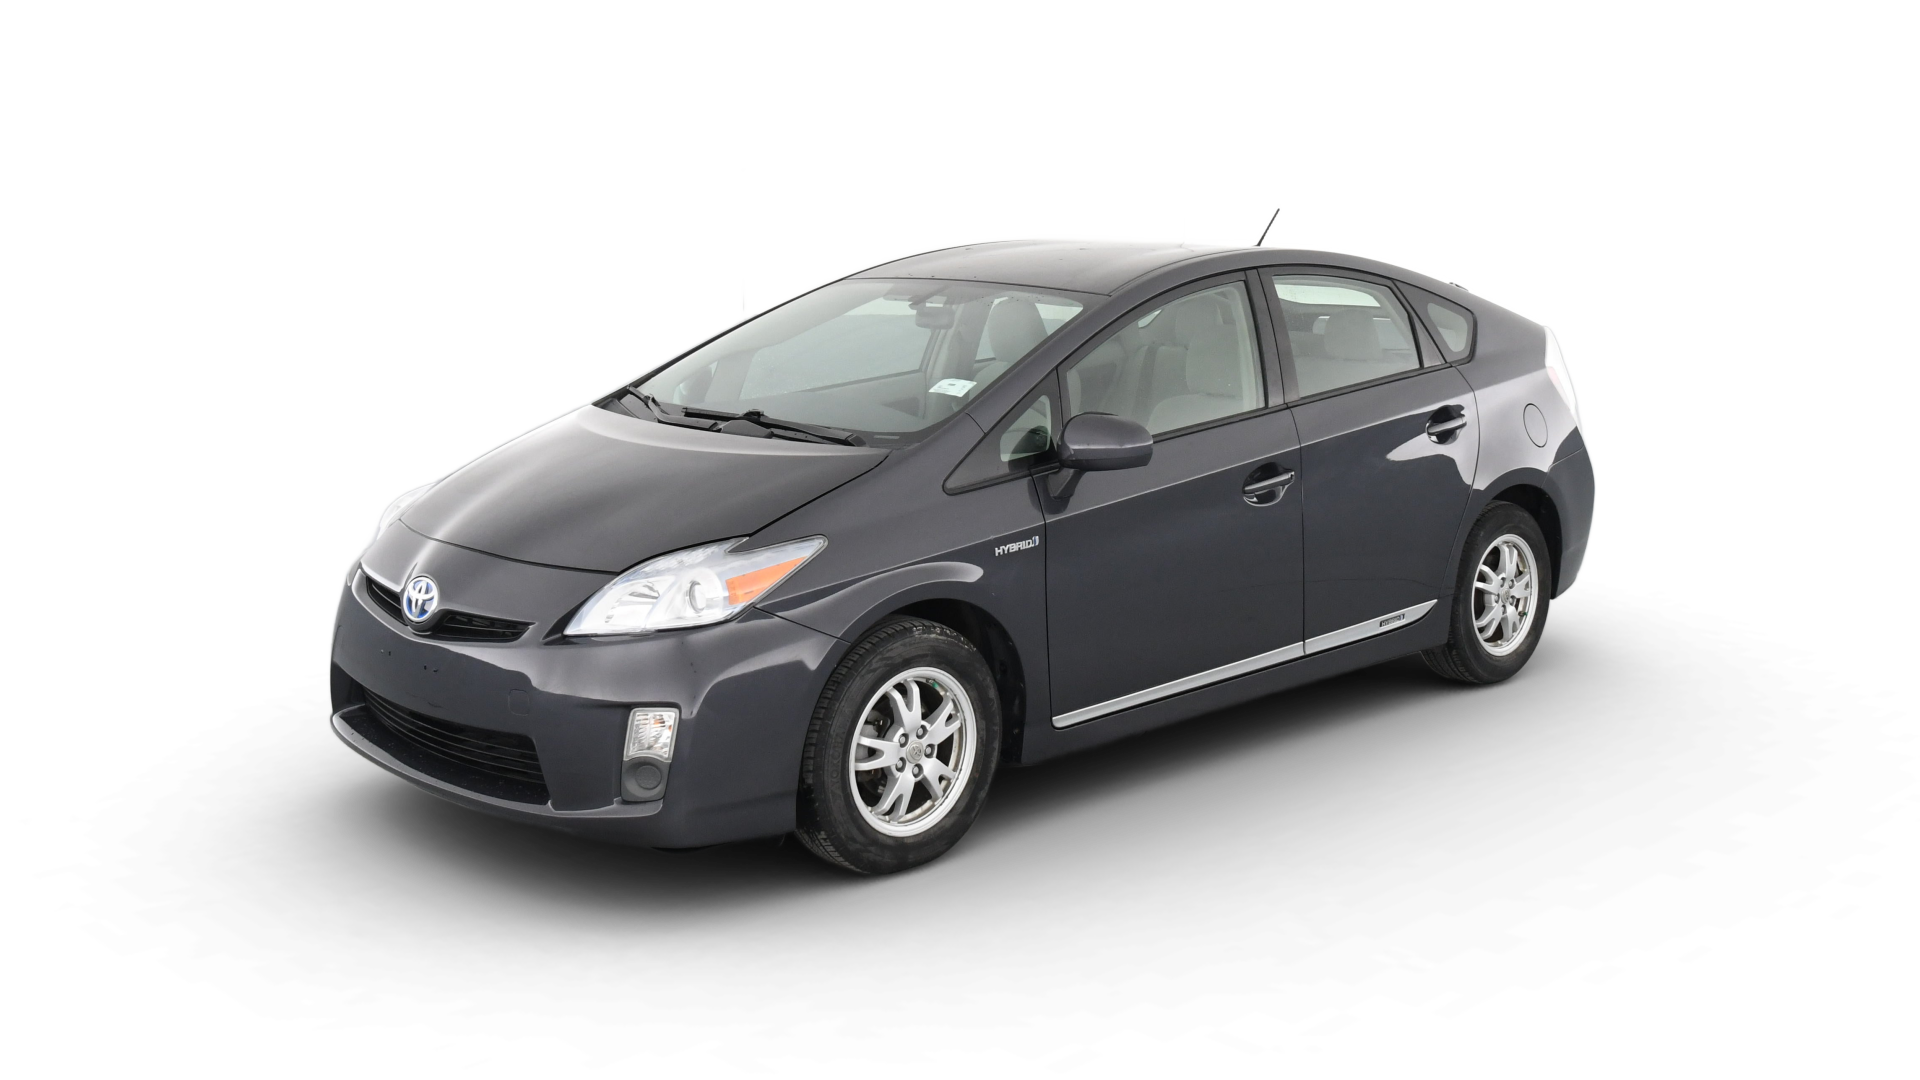 Used Toyota Prius For Sale Online | Carvana